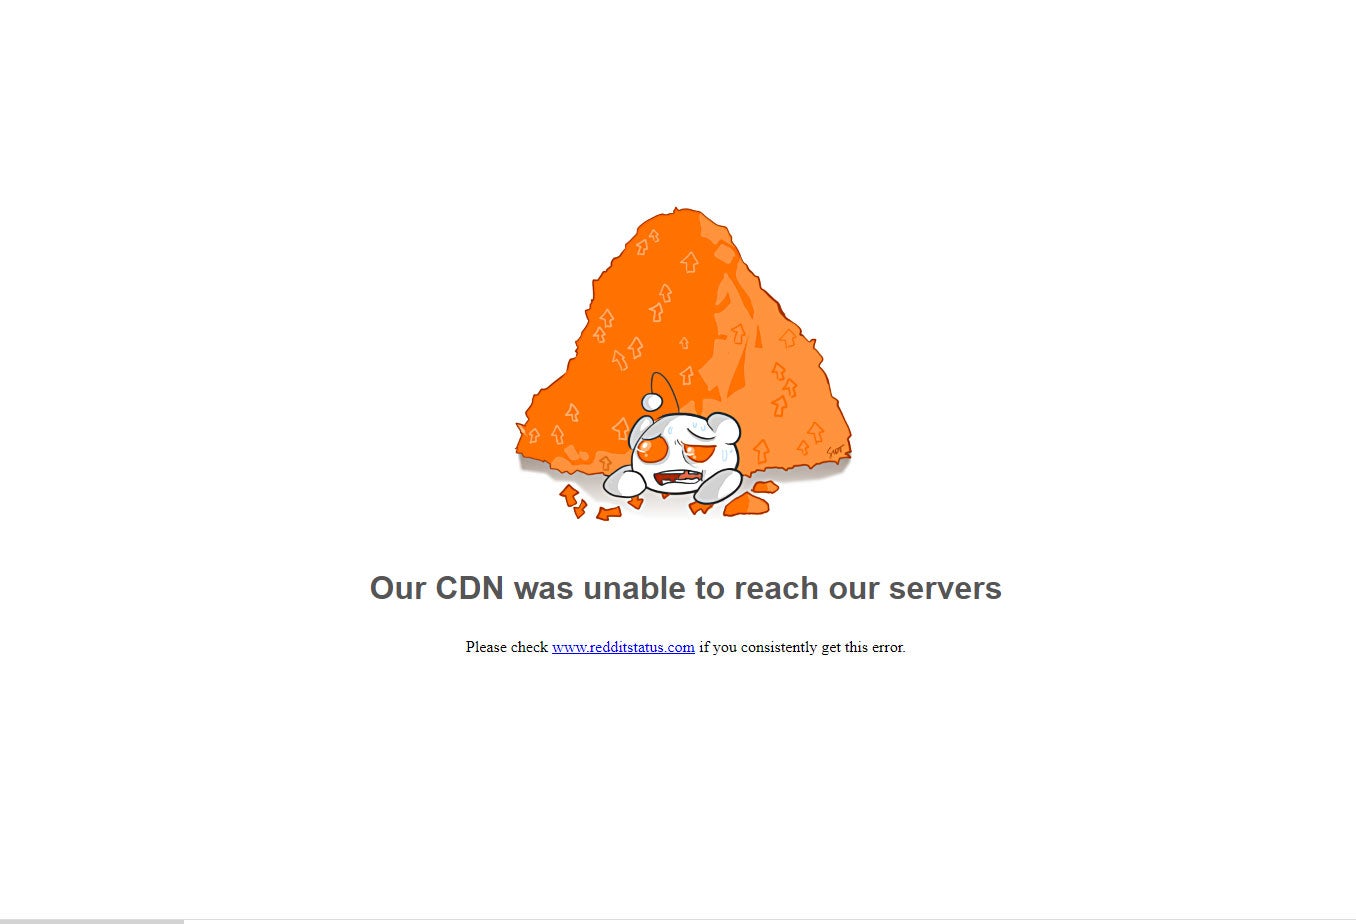 reddit: the front page of the internet